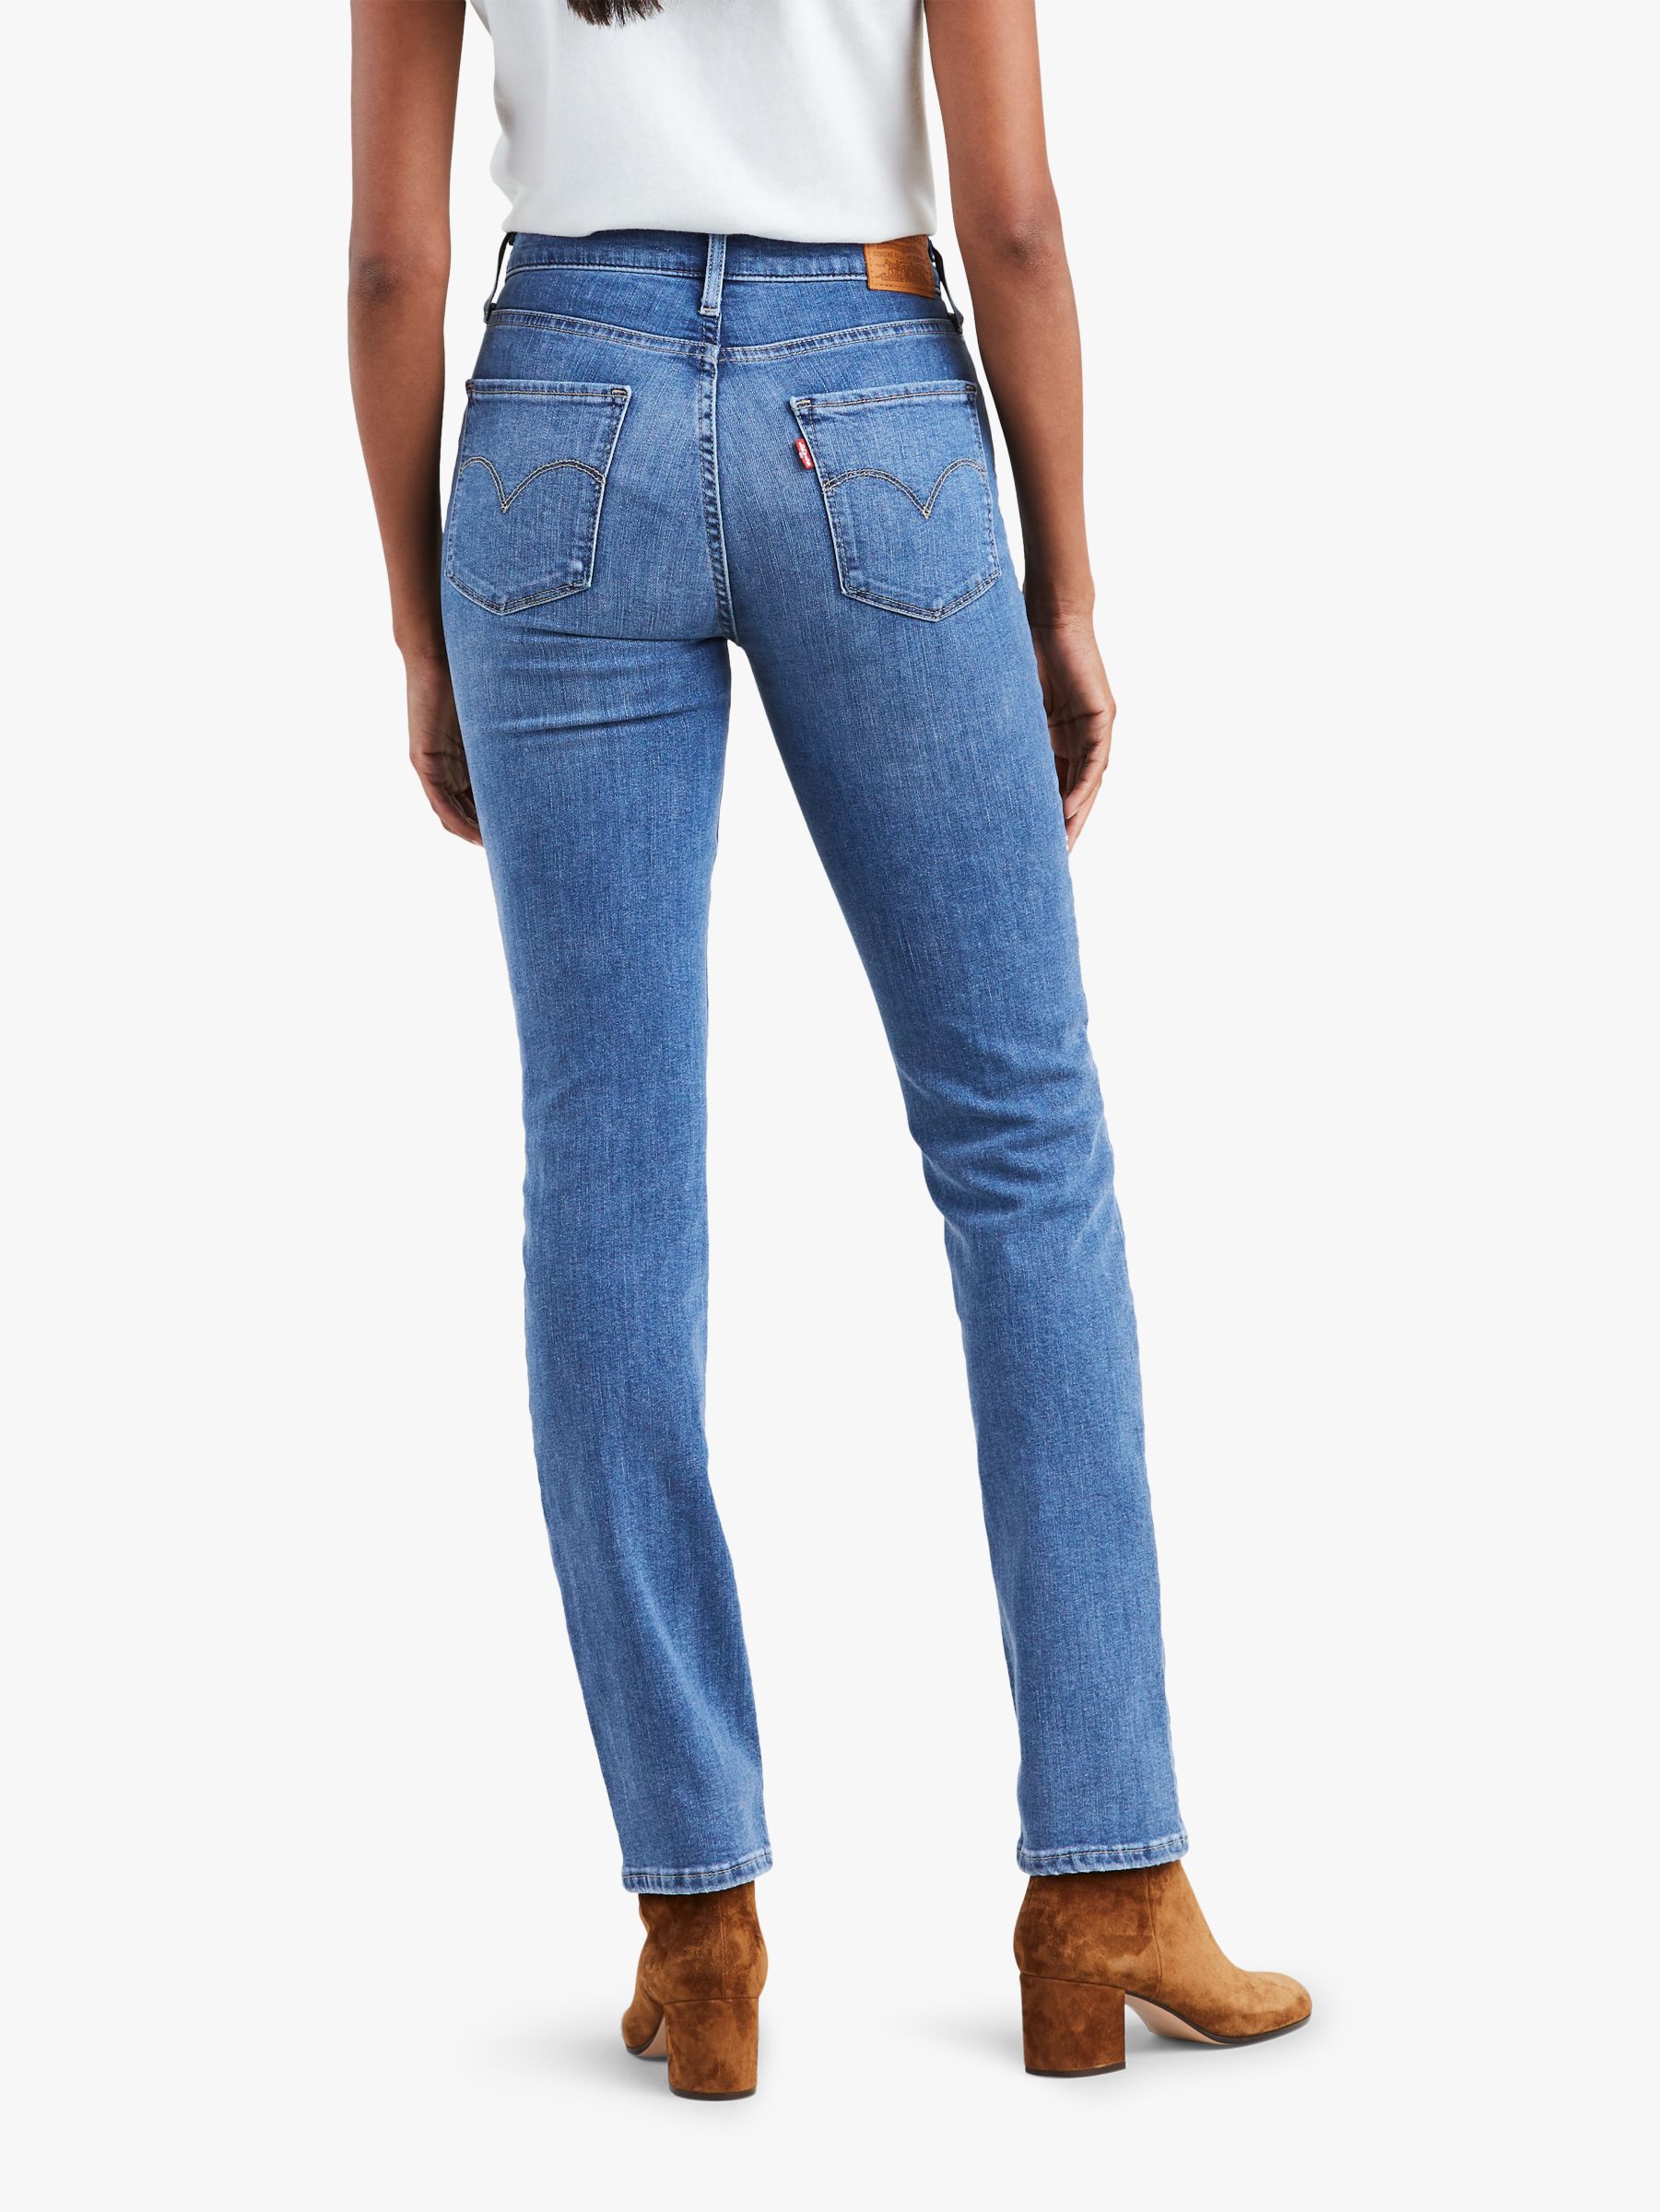 levi's 724 high rise straight jeans second thought